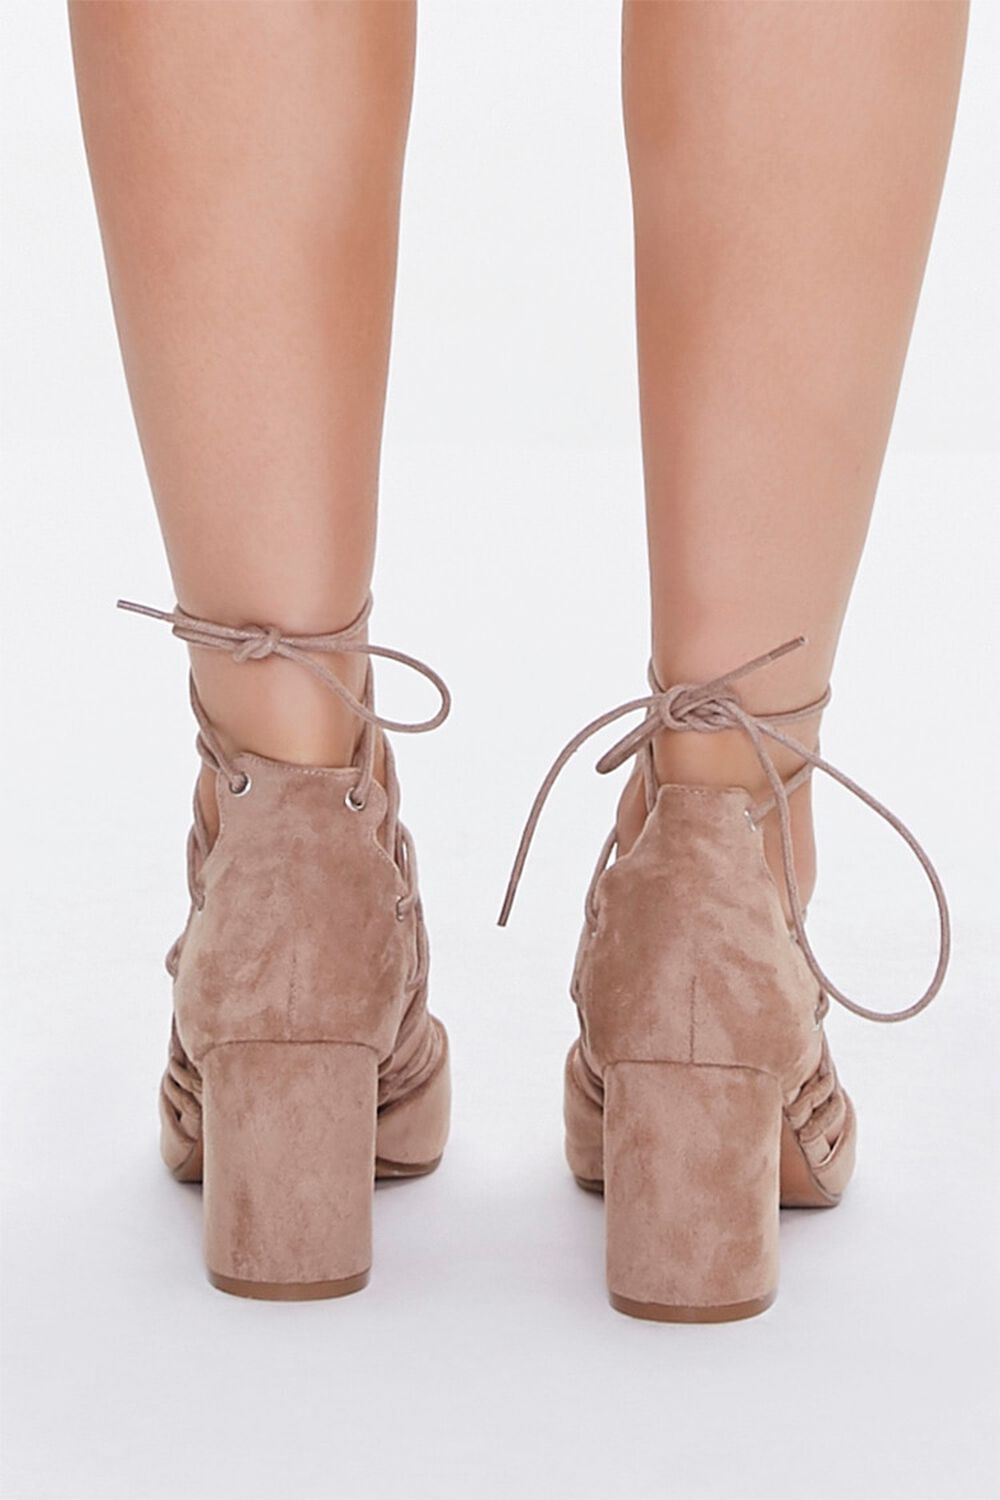 NUDE Faux Suede Lace-Up Block Heels, image 3